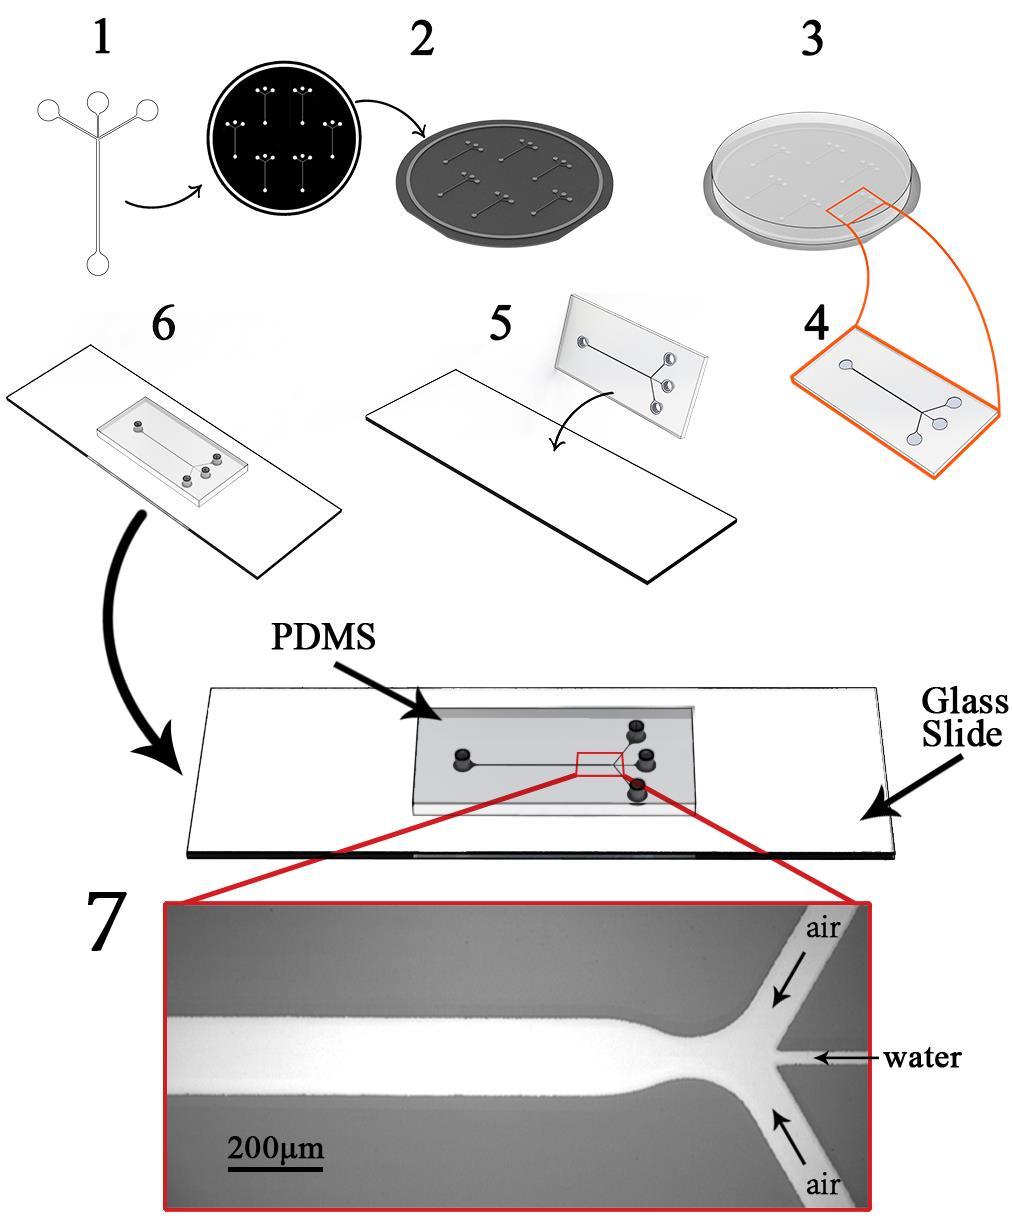 Figure 5. Schematic representation of the fabrication procedure for production and assembly of microfluidic devices. (1) Required channel geometry is designed and printed on transparency sheets.